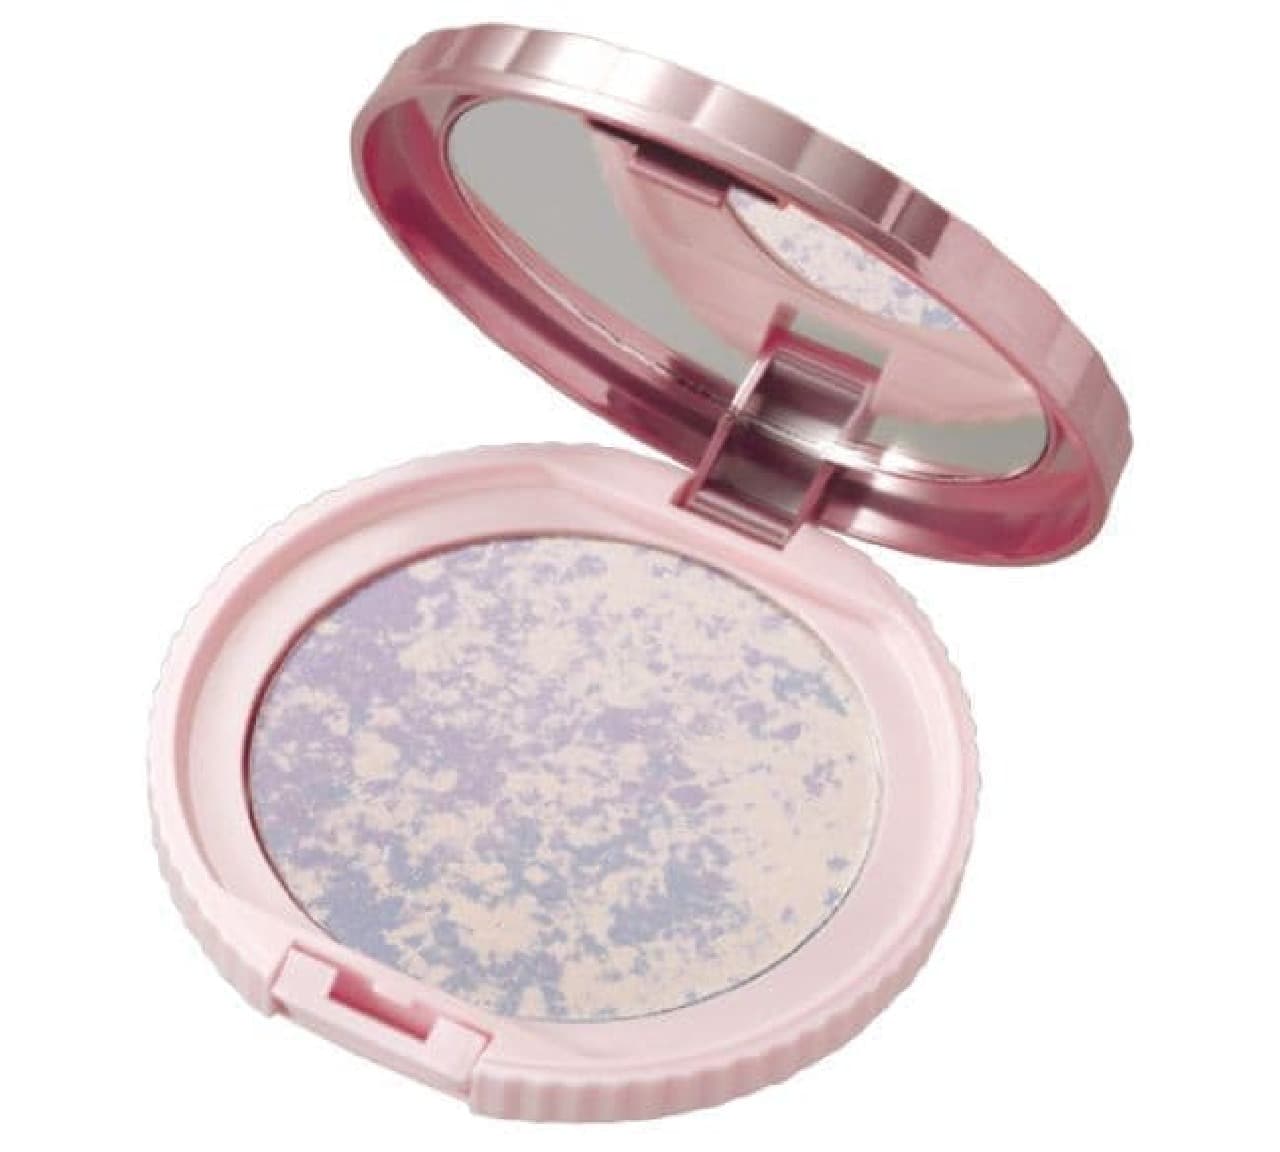 Limited color "SS Shiny Seaside" of Canmake "Transparent Finish Powder"